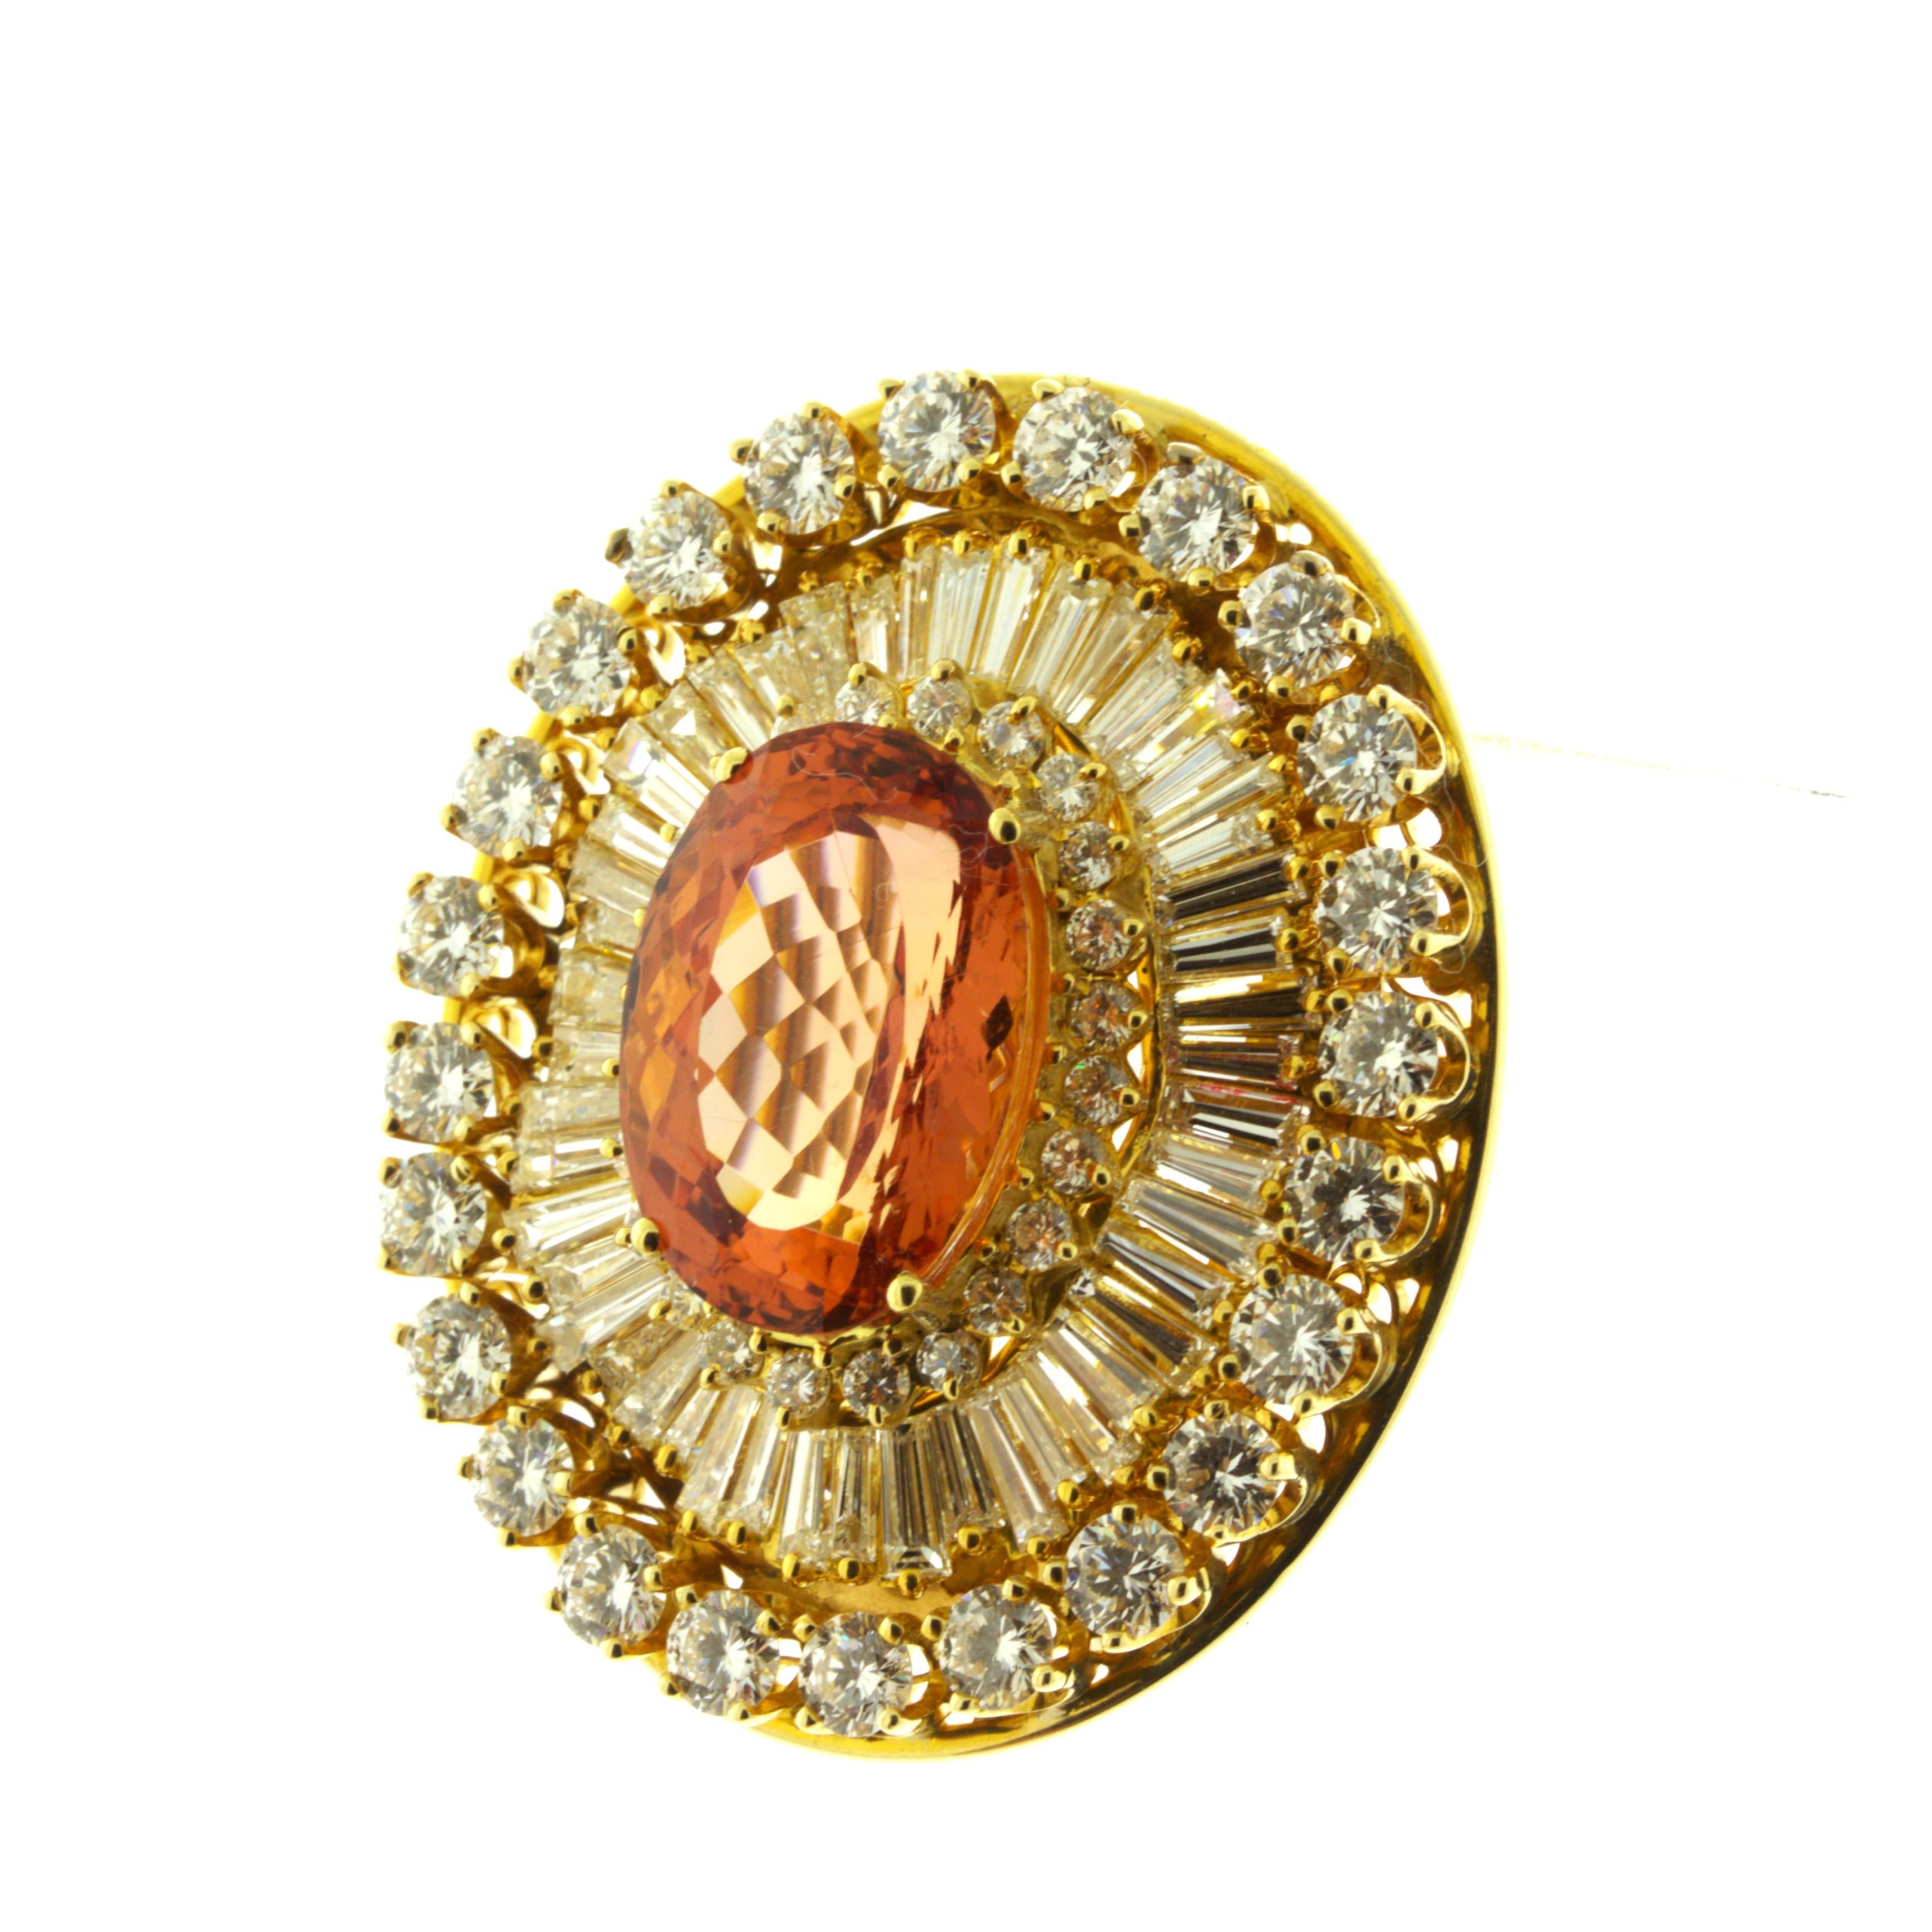 Superb Imperial Topaz Diamond 18K Yellow Gold Brooch, AGL Certified For Sale 1